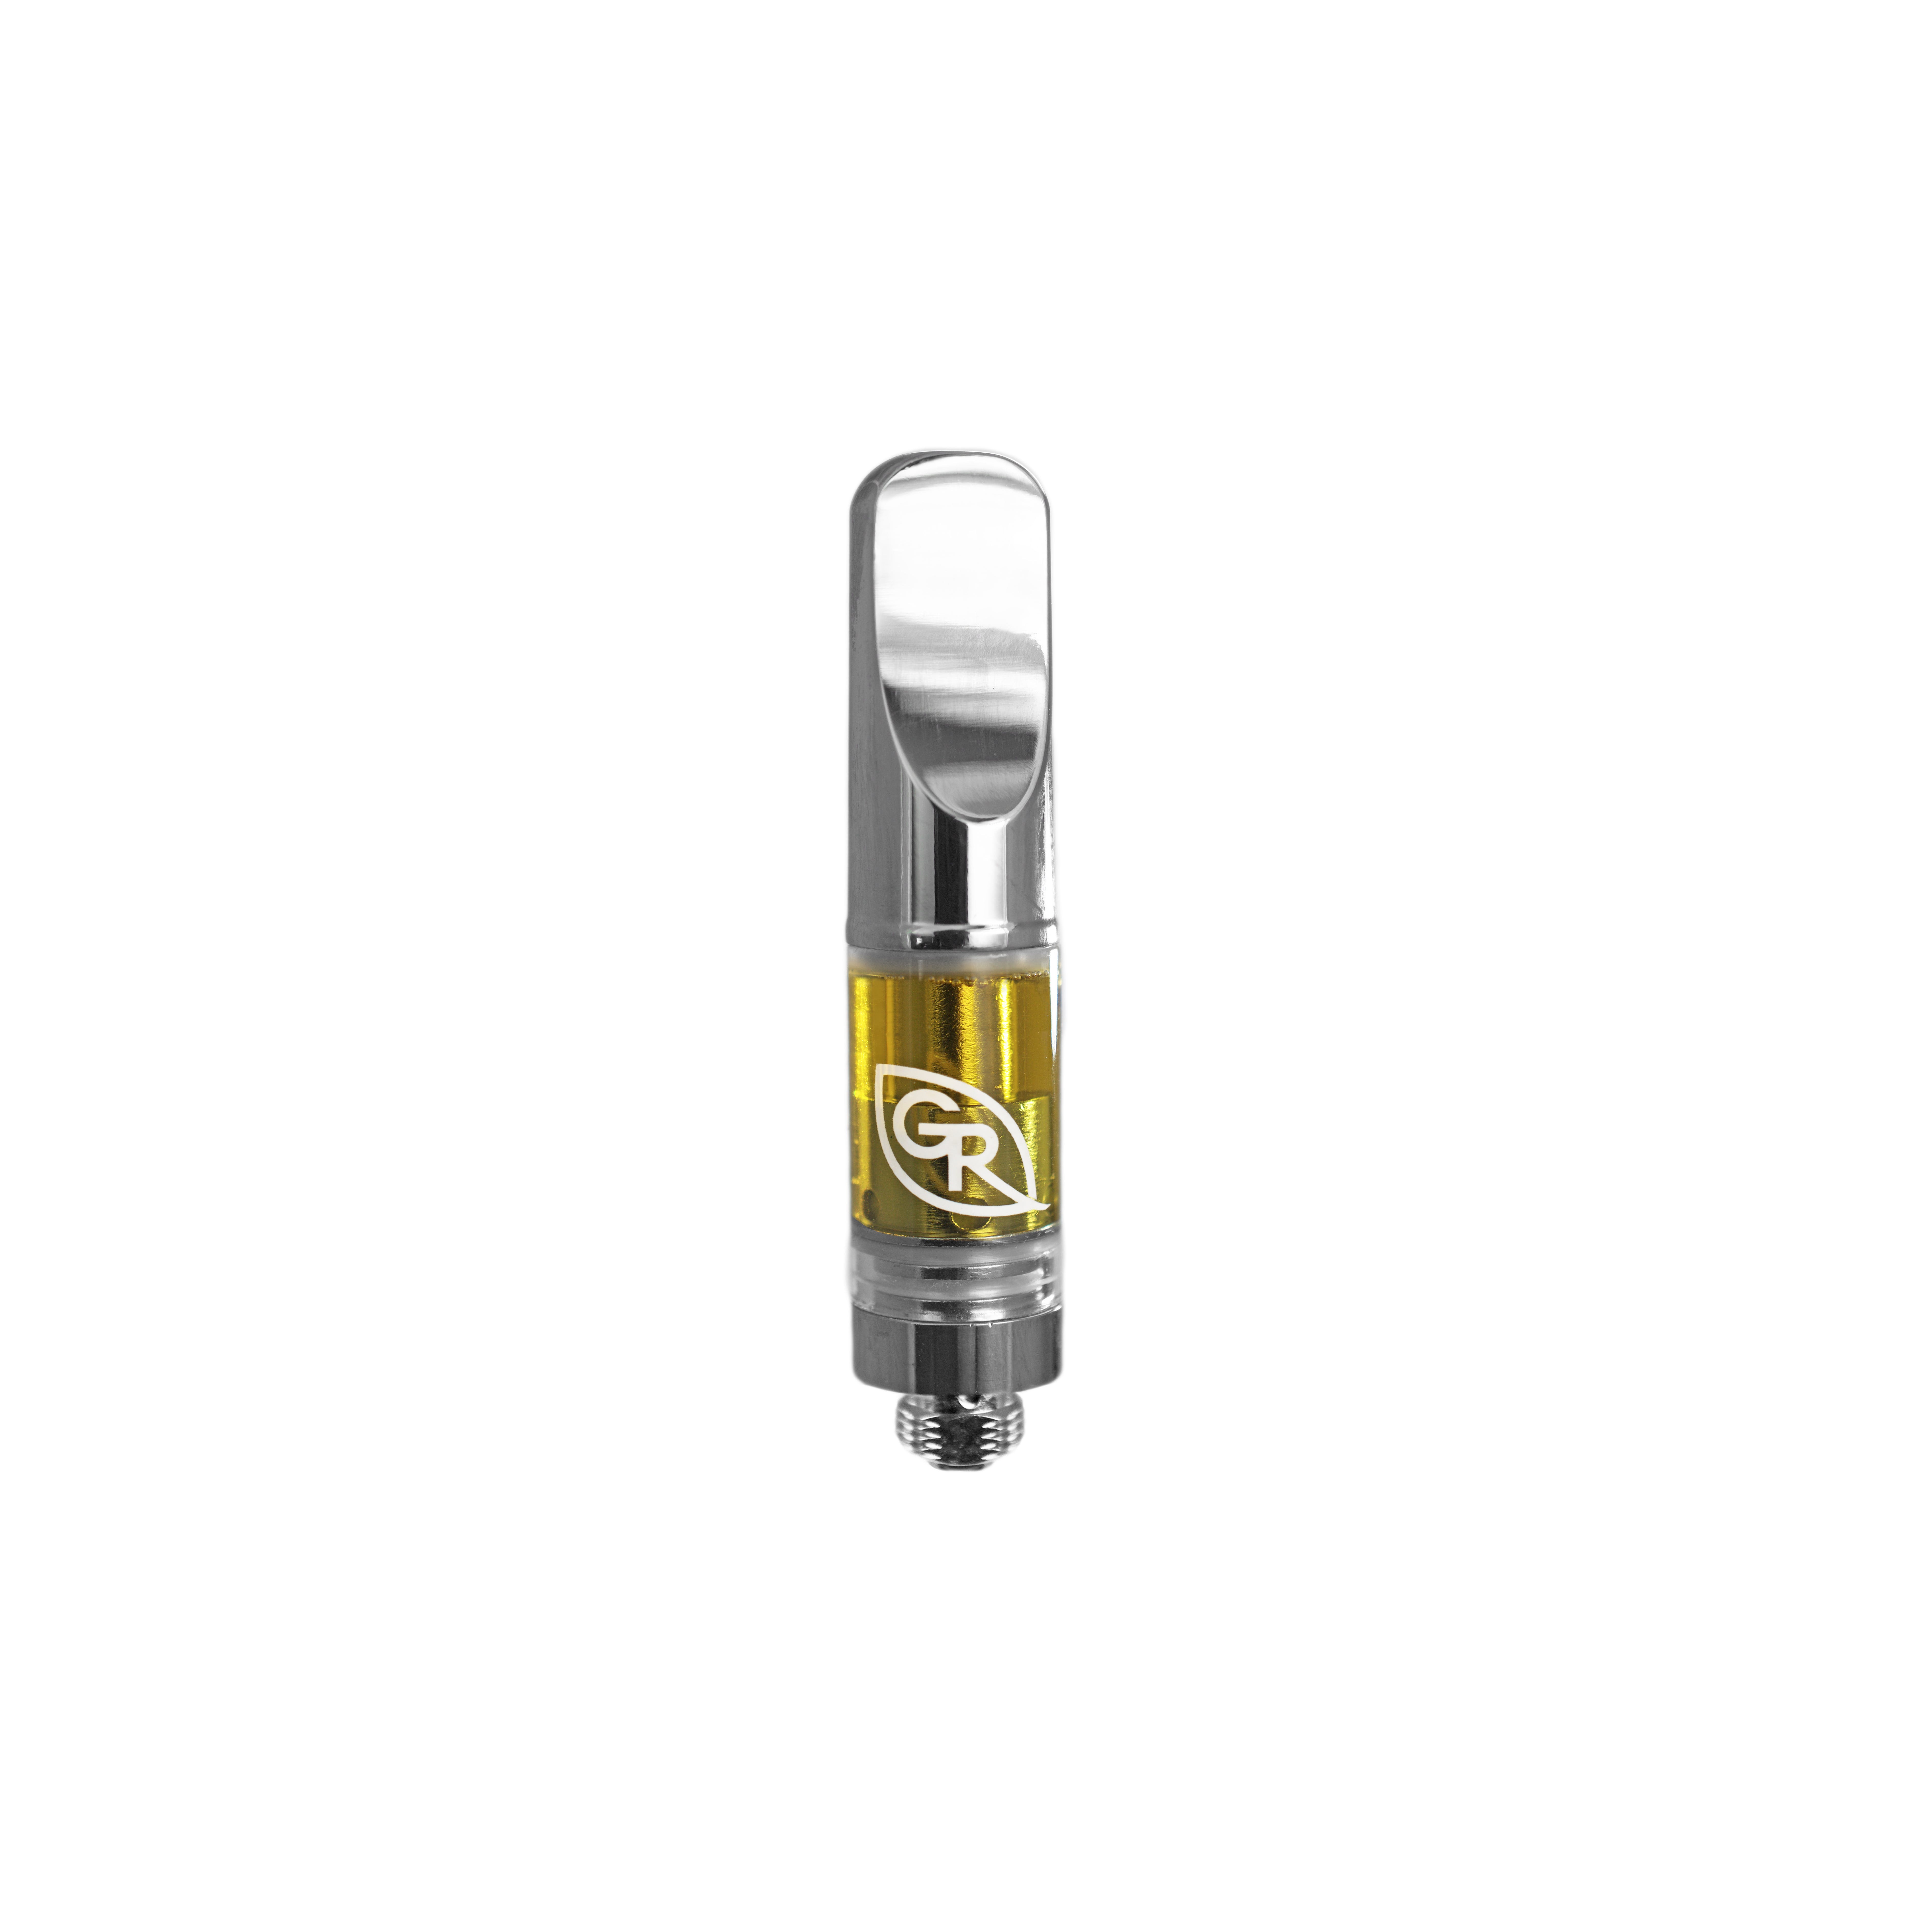 concentrate-garden-remedies-grease-monkey-vape-cartridge-500mg